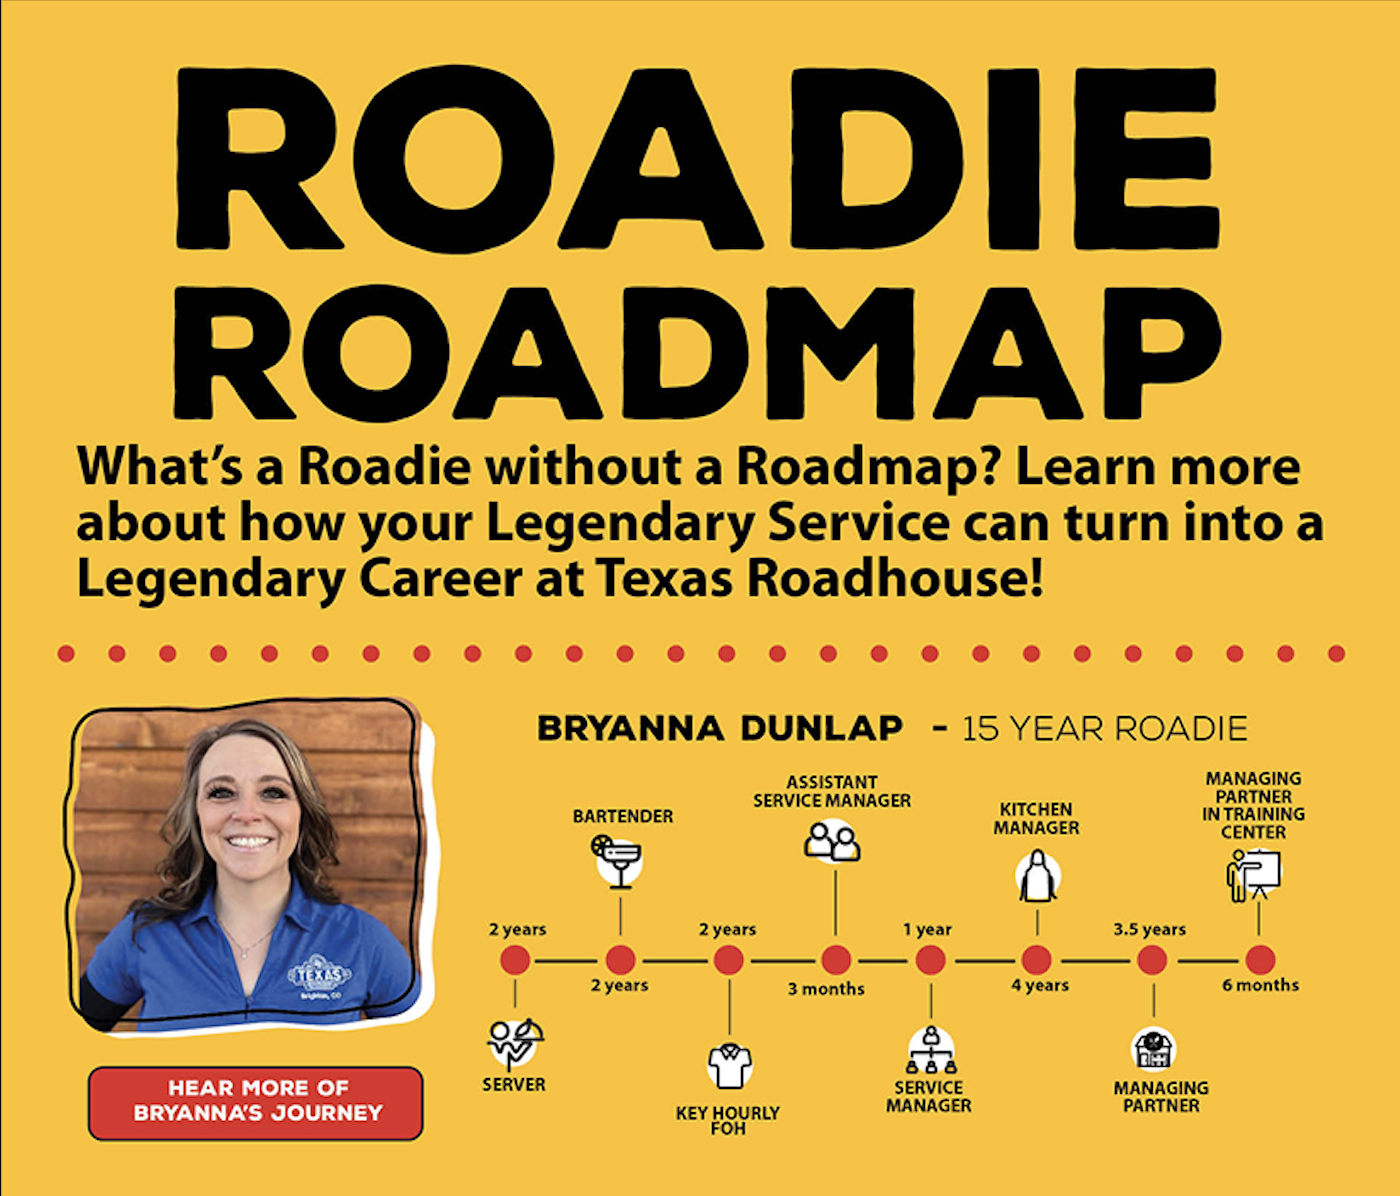 link to Bryanna Dunlap's Bio after 15 years as a Roadie